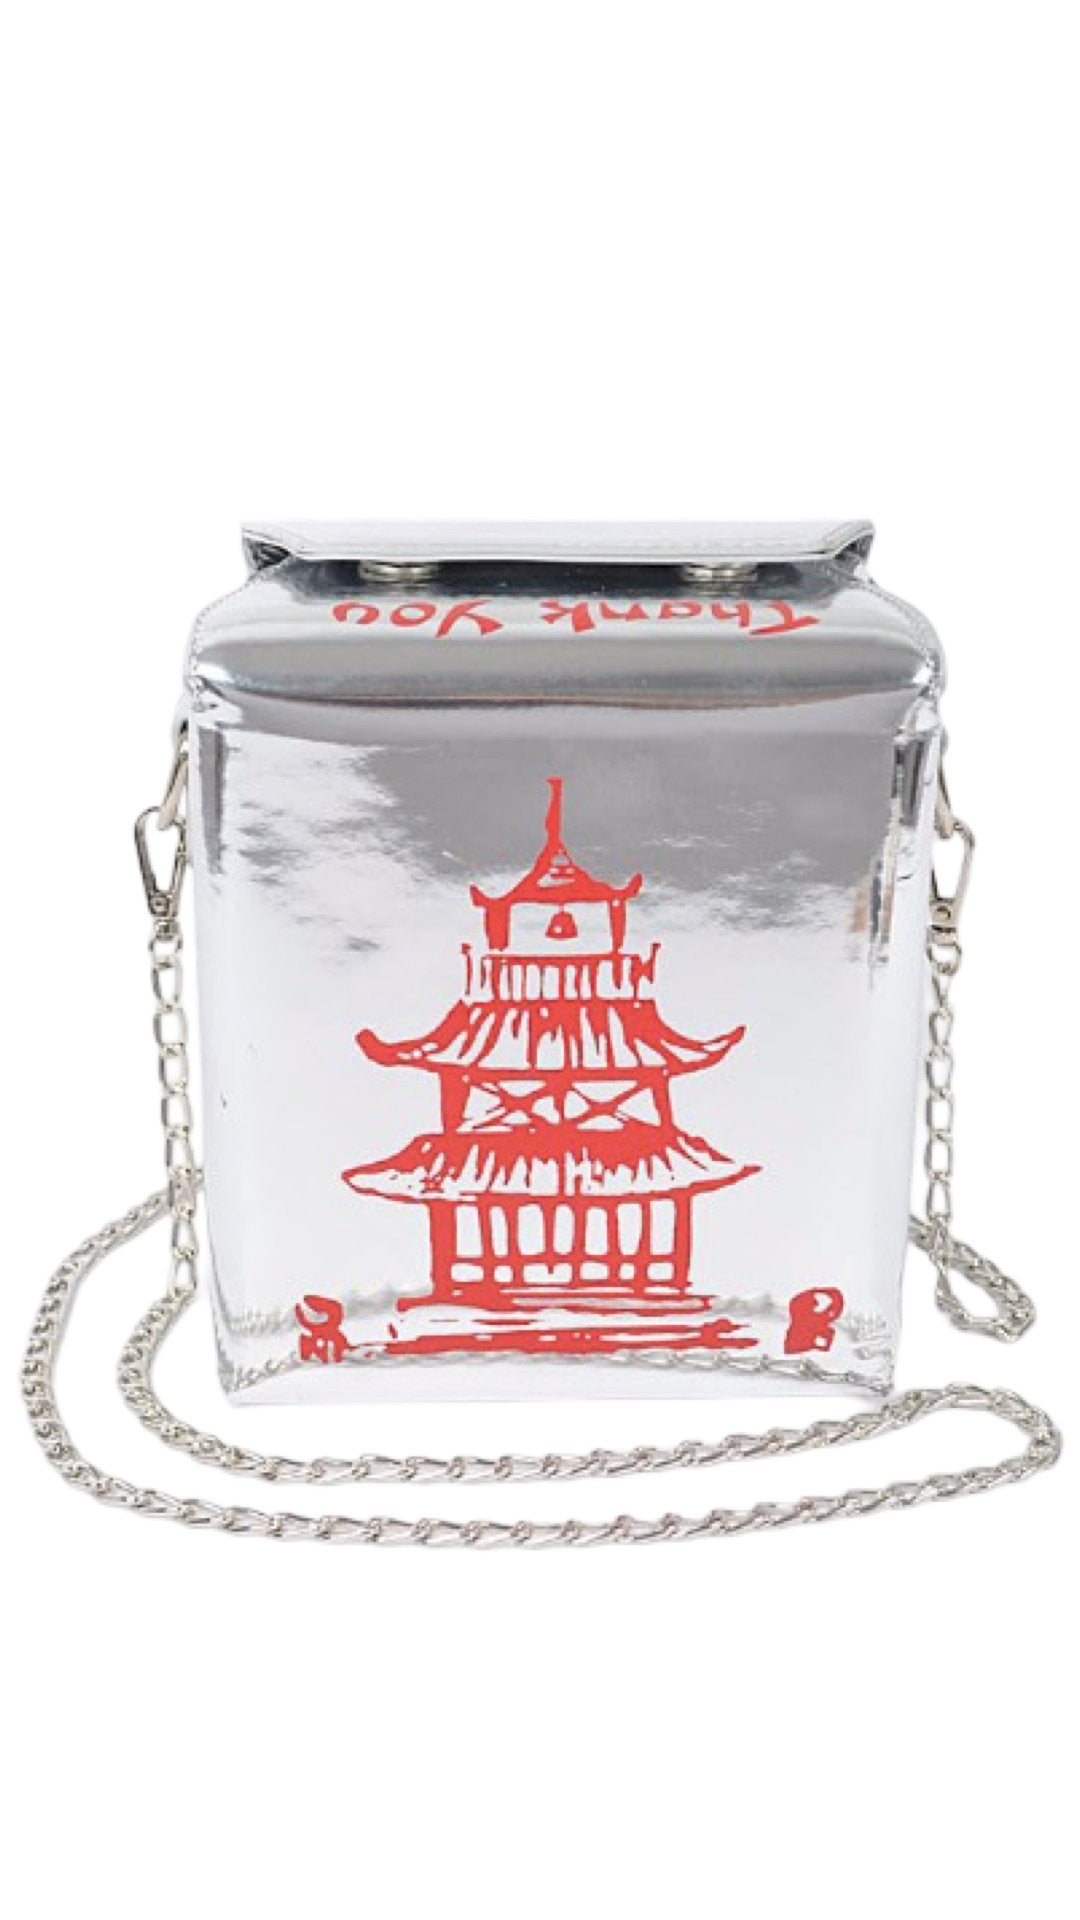 Chinese Takeout Box Bag Silver - Model Express VancouverAccessories